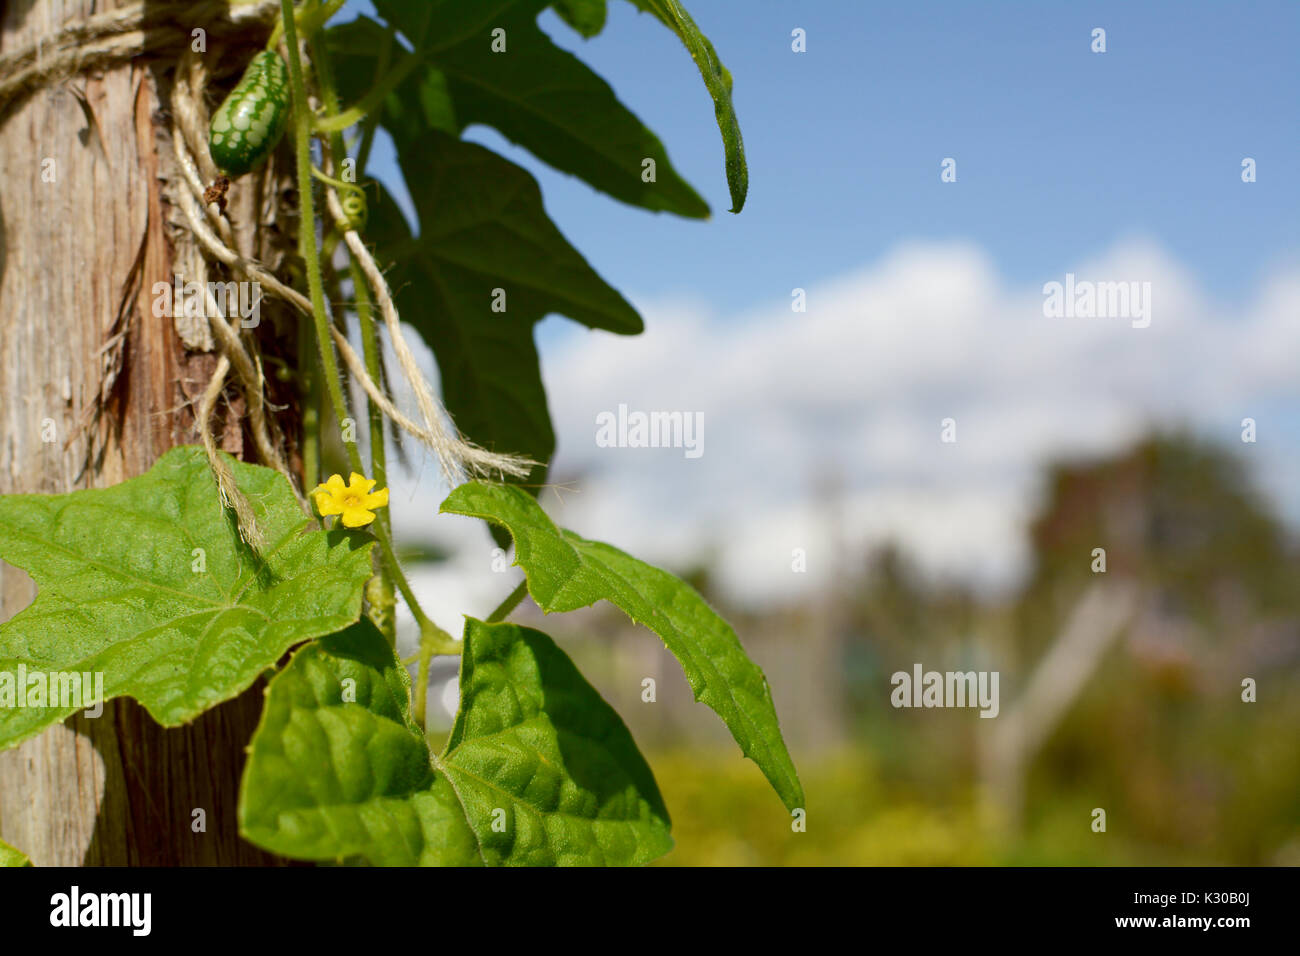 Small yellow flower on cucamelon vine, growing up a wooden pole. Allotment and blue sky beyond. Stock Photo